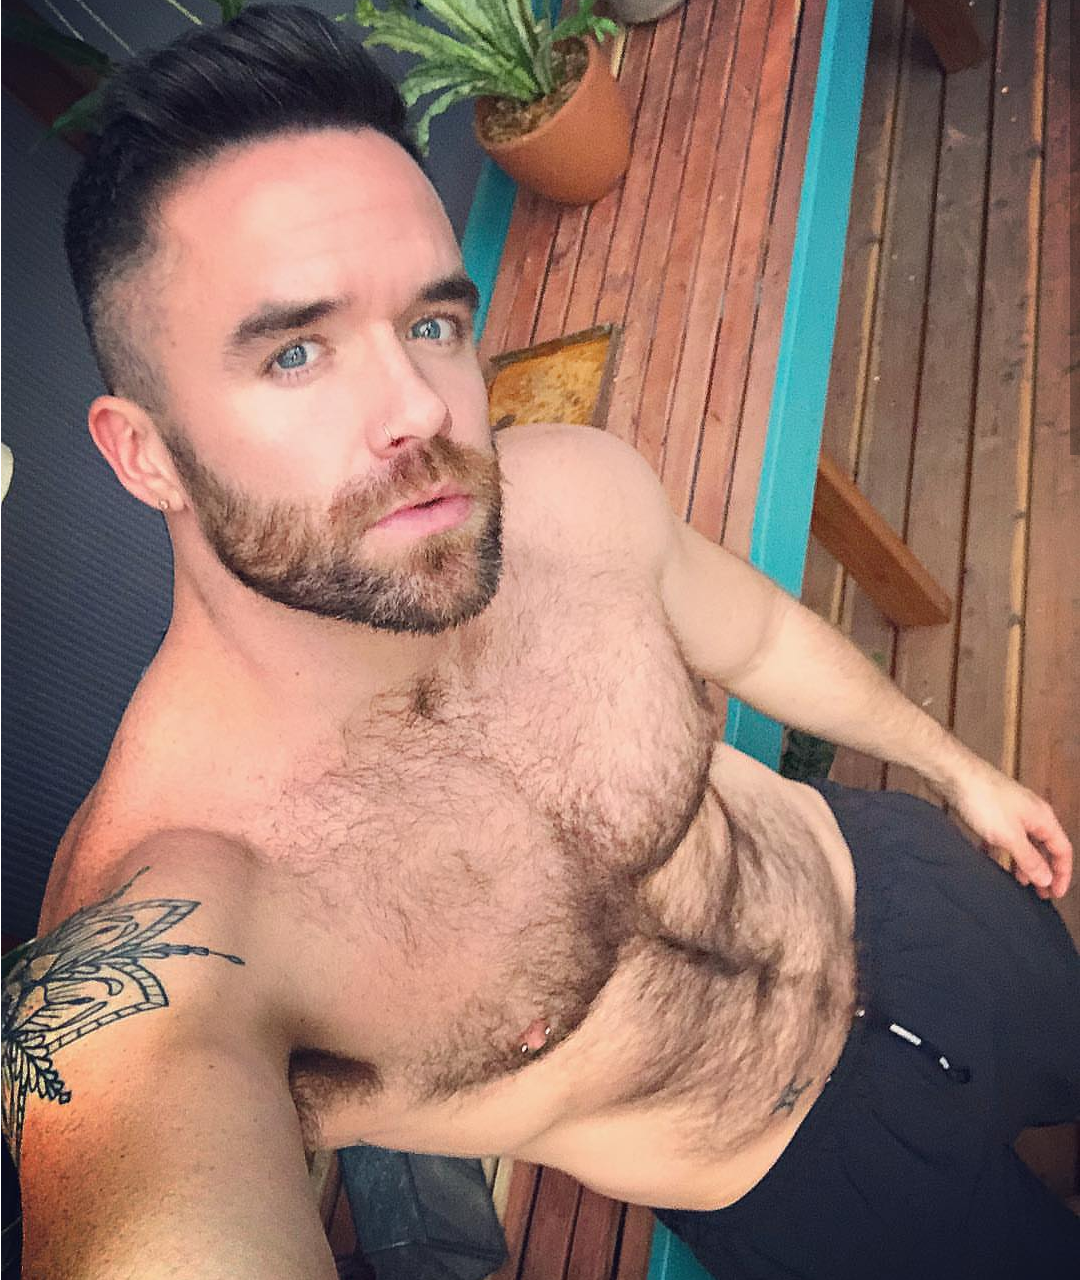 pwfm's Top 20 celebrities known for their penis #9 Brian Justin Crum.